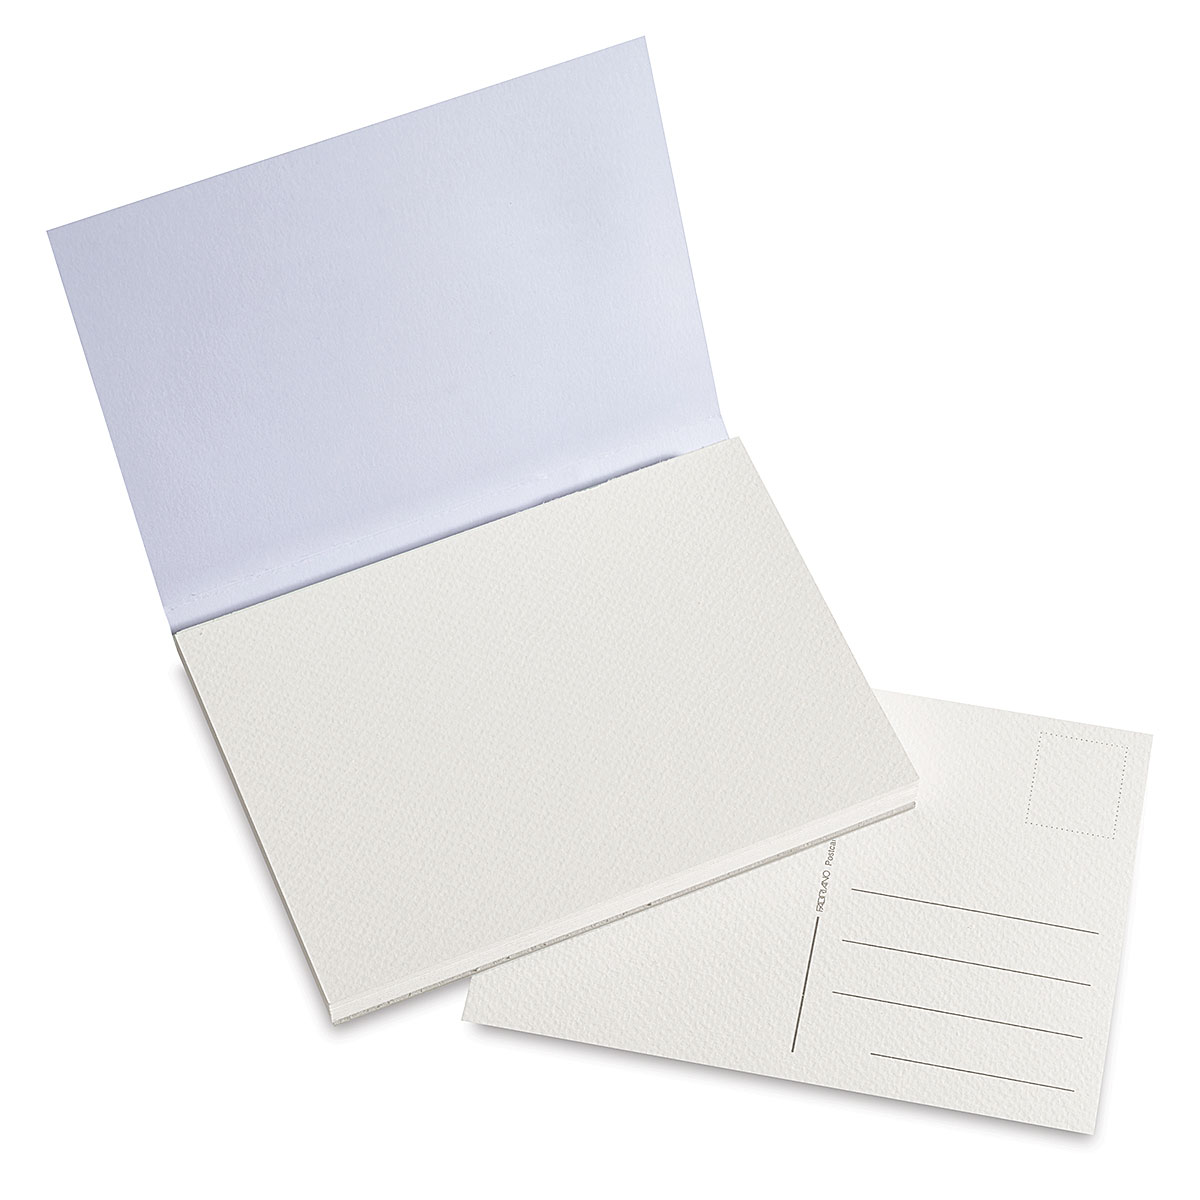 Watercolor Blank Cards and Envelopes | Extra Thick Blank Greeting Cards and Envelopes for 5x7 Cards | Premium 300 GSM Watercolor Paper Postcards for